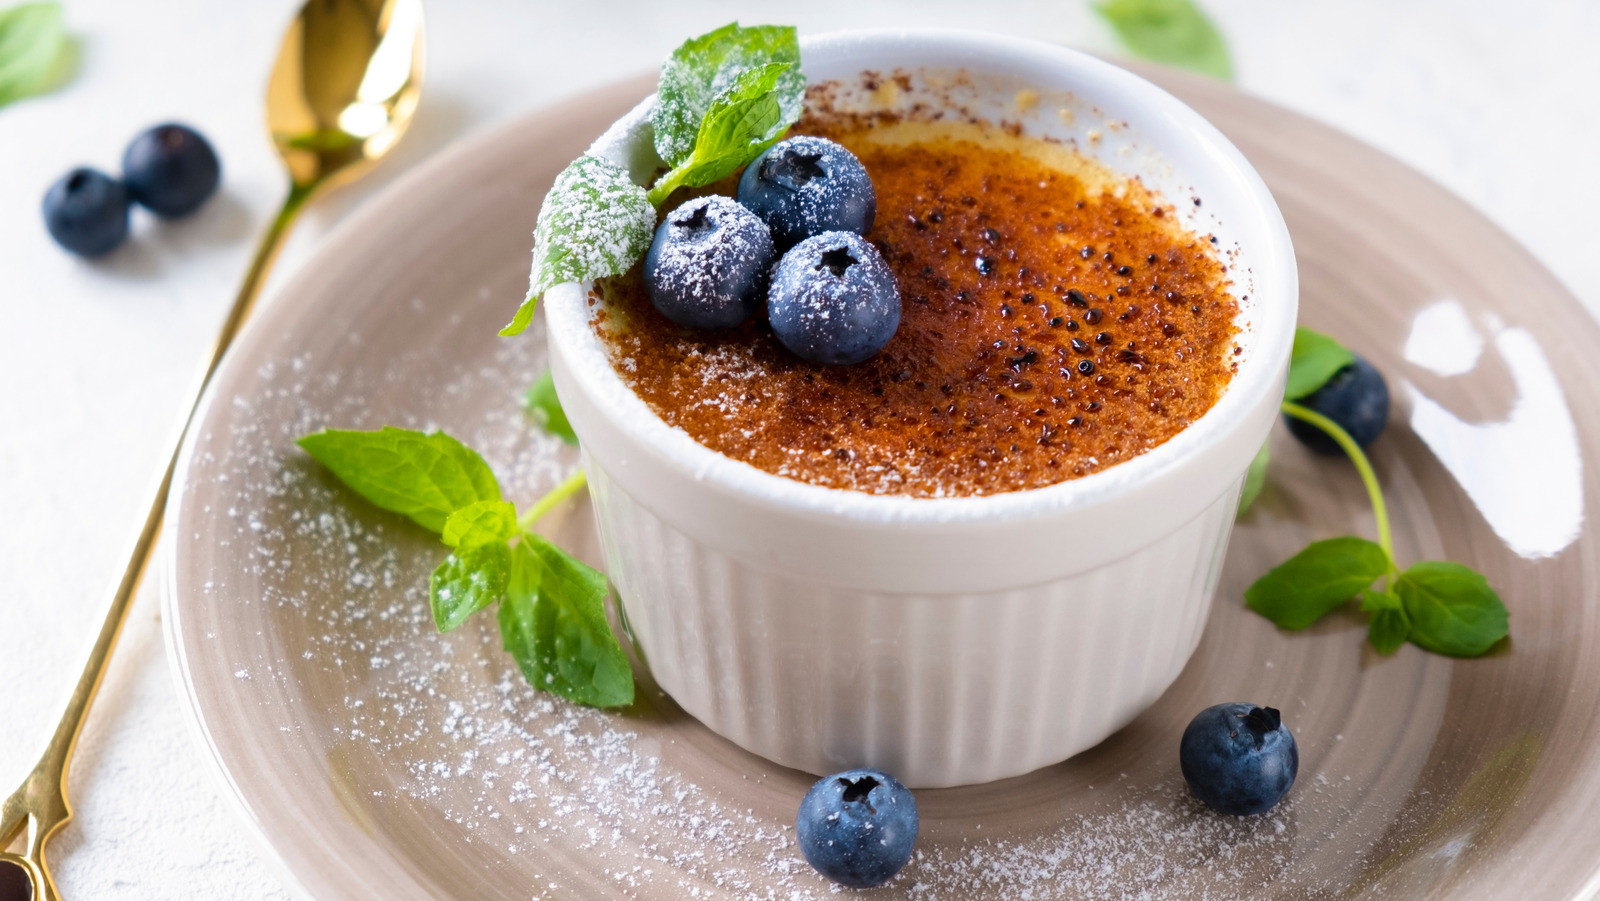 This NYC Restaurant Is The Reason Crème Brûlée Became Popular